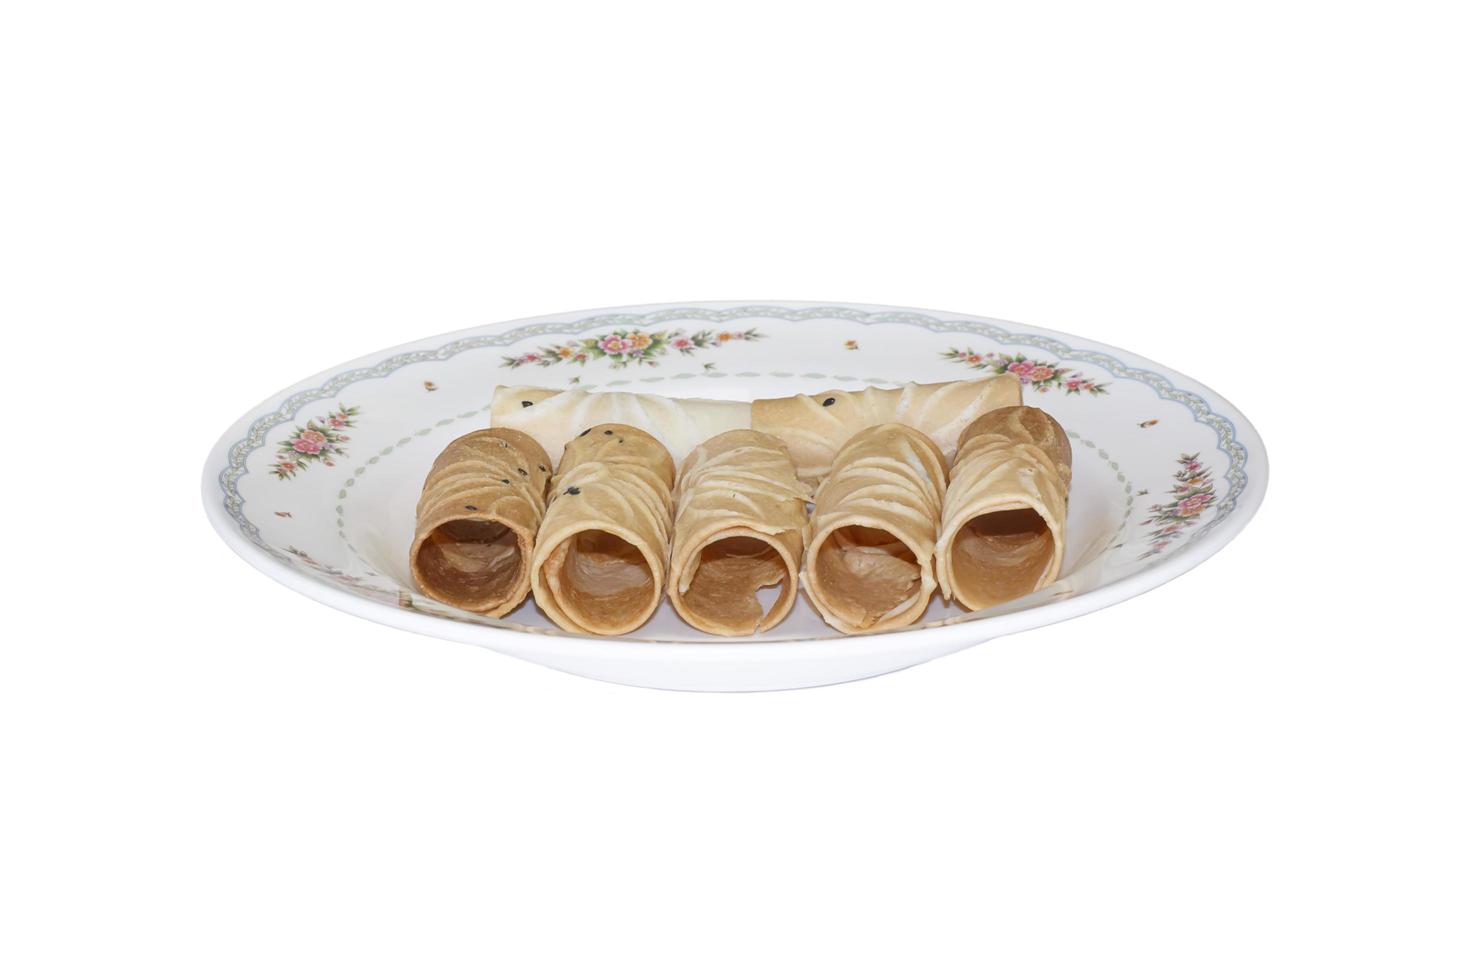 Tong Muan Rolled Wafer Thailand at the dish on white background. photo